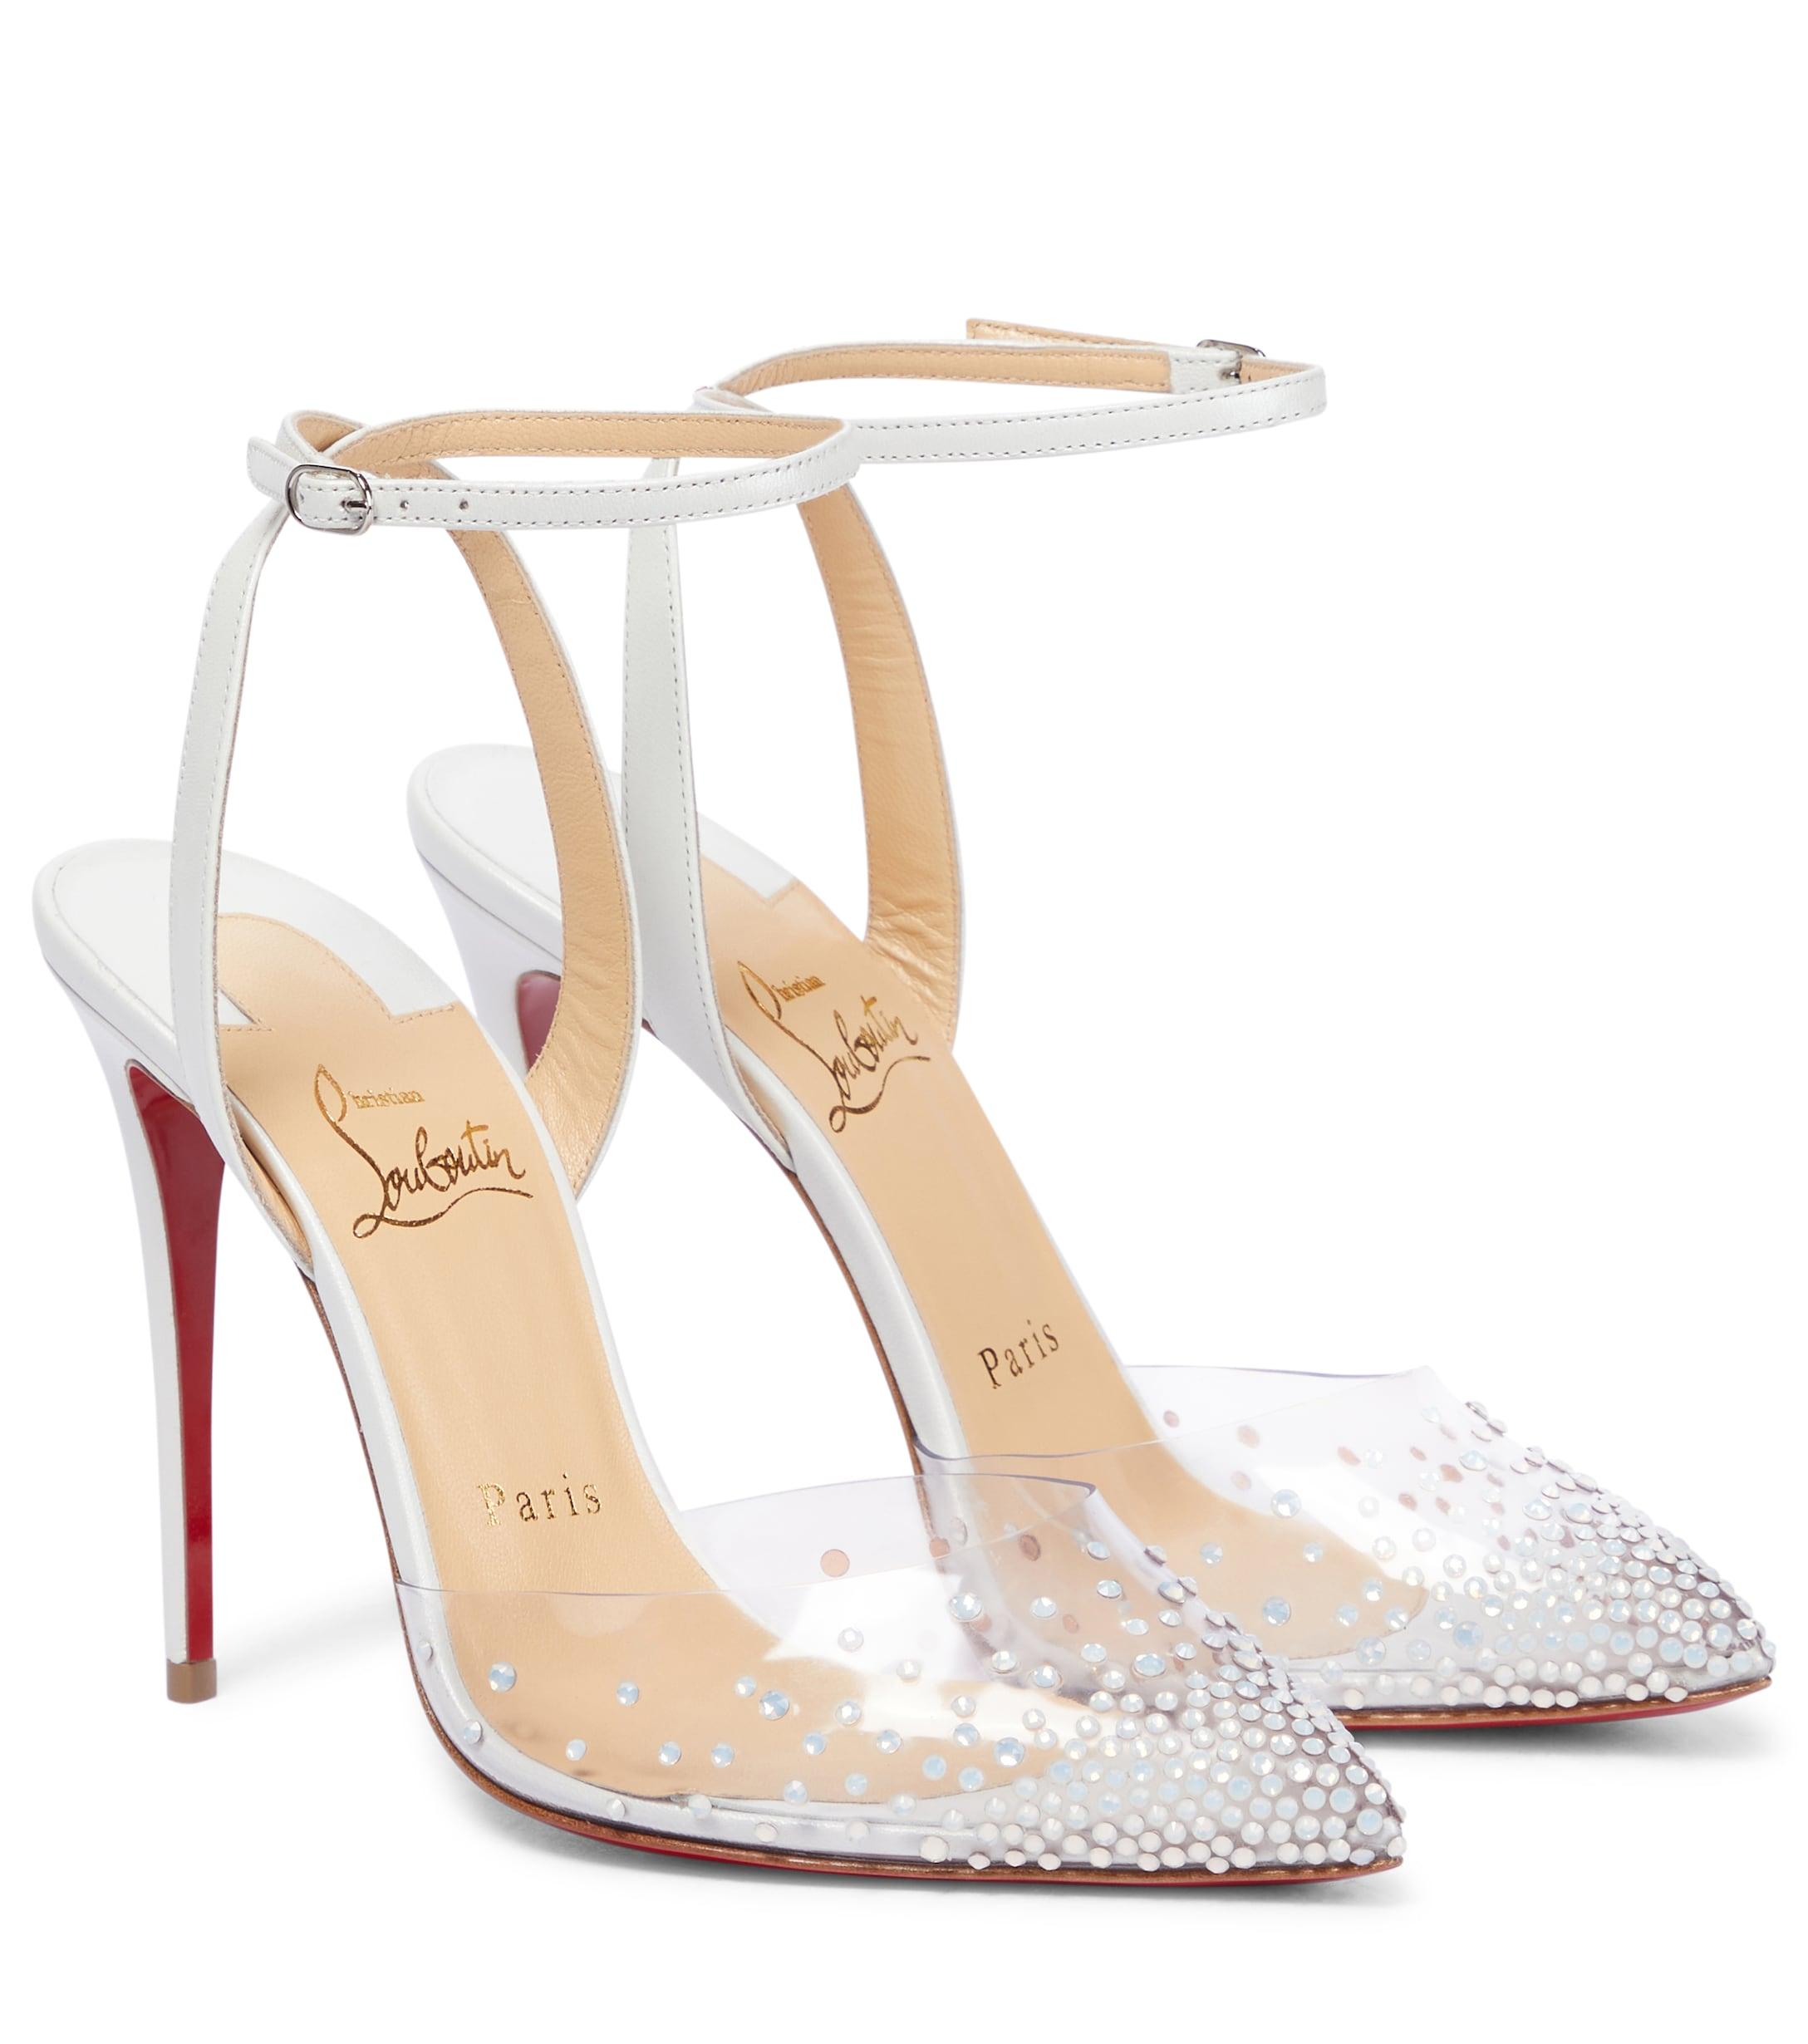 Christian Louboutin Spikaqueen 100 Embellished Pvc Pumps in White | Lyst